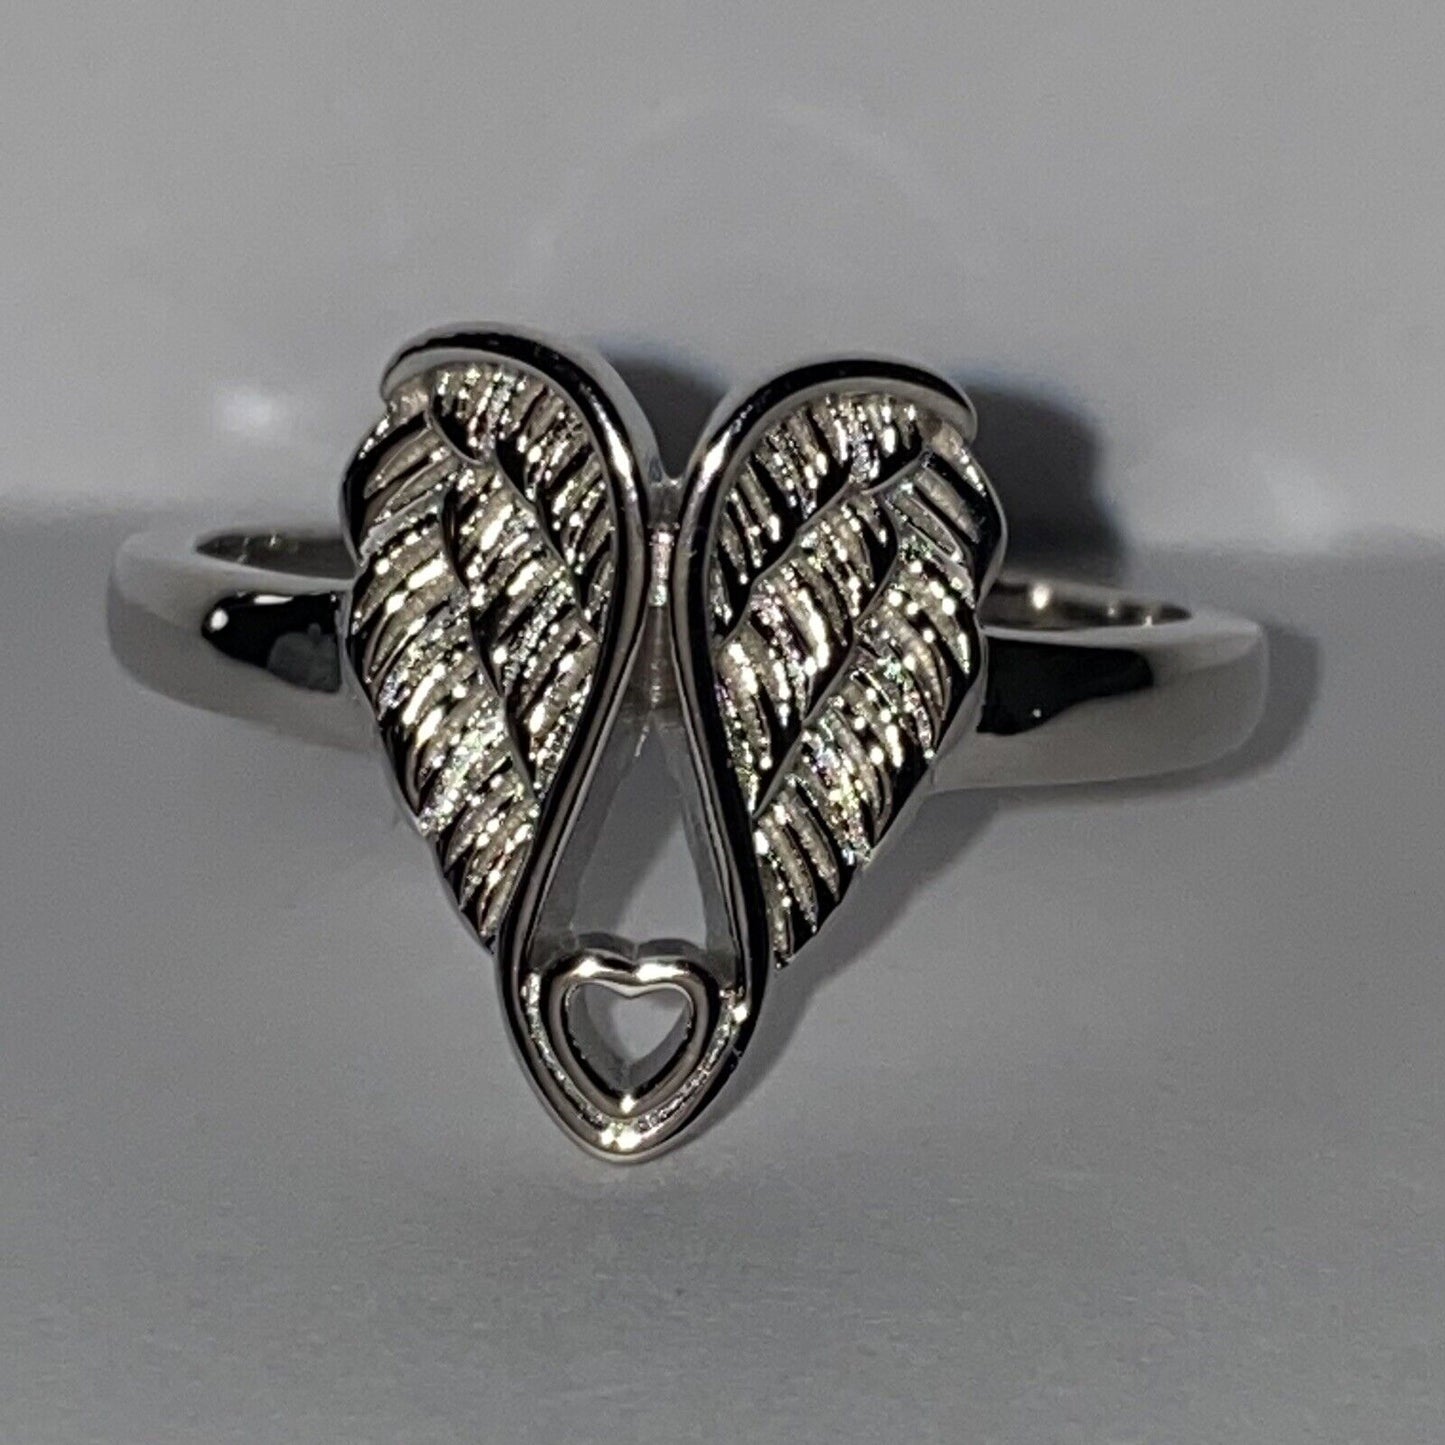 Vintage Angel Wings Amulet Heart-shaped Sterling Silver Ring - Size 6